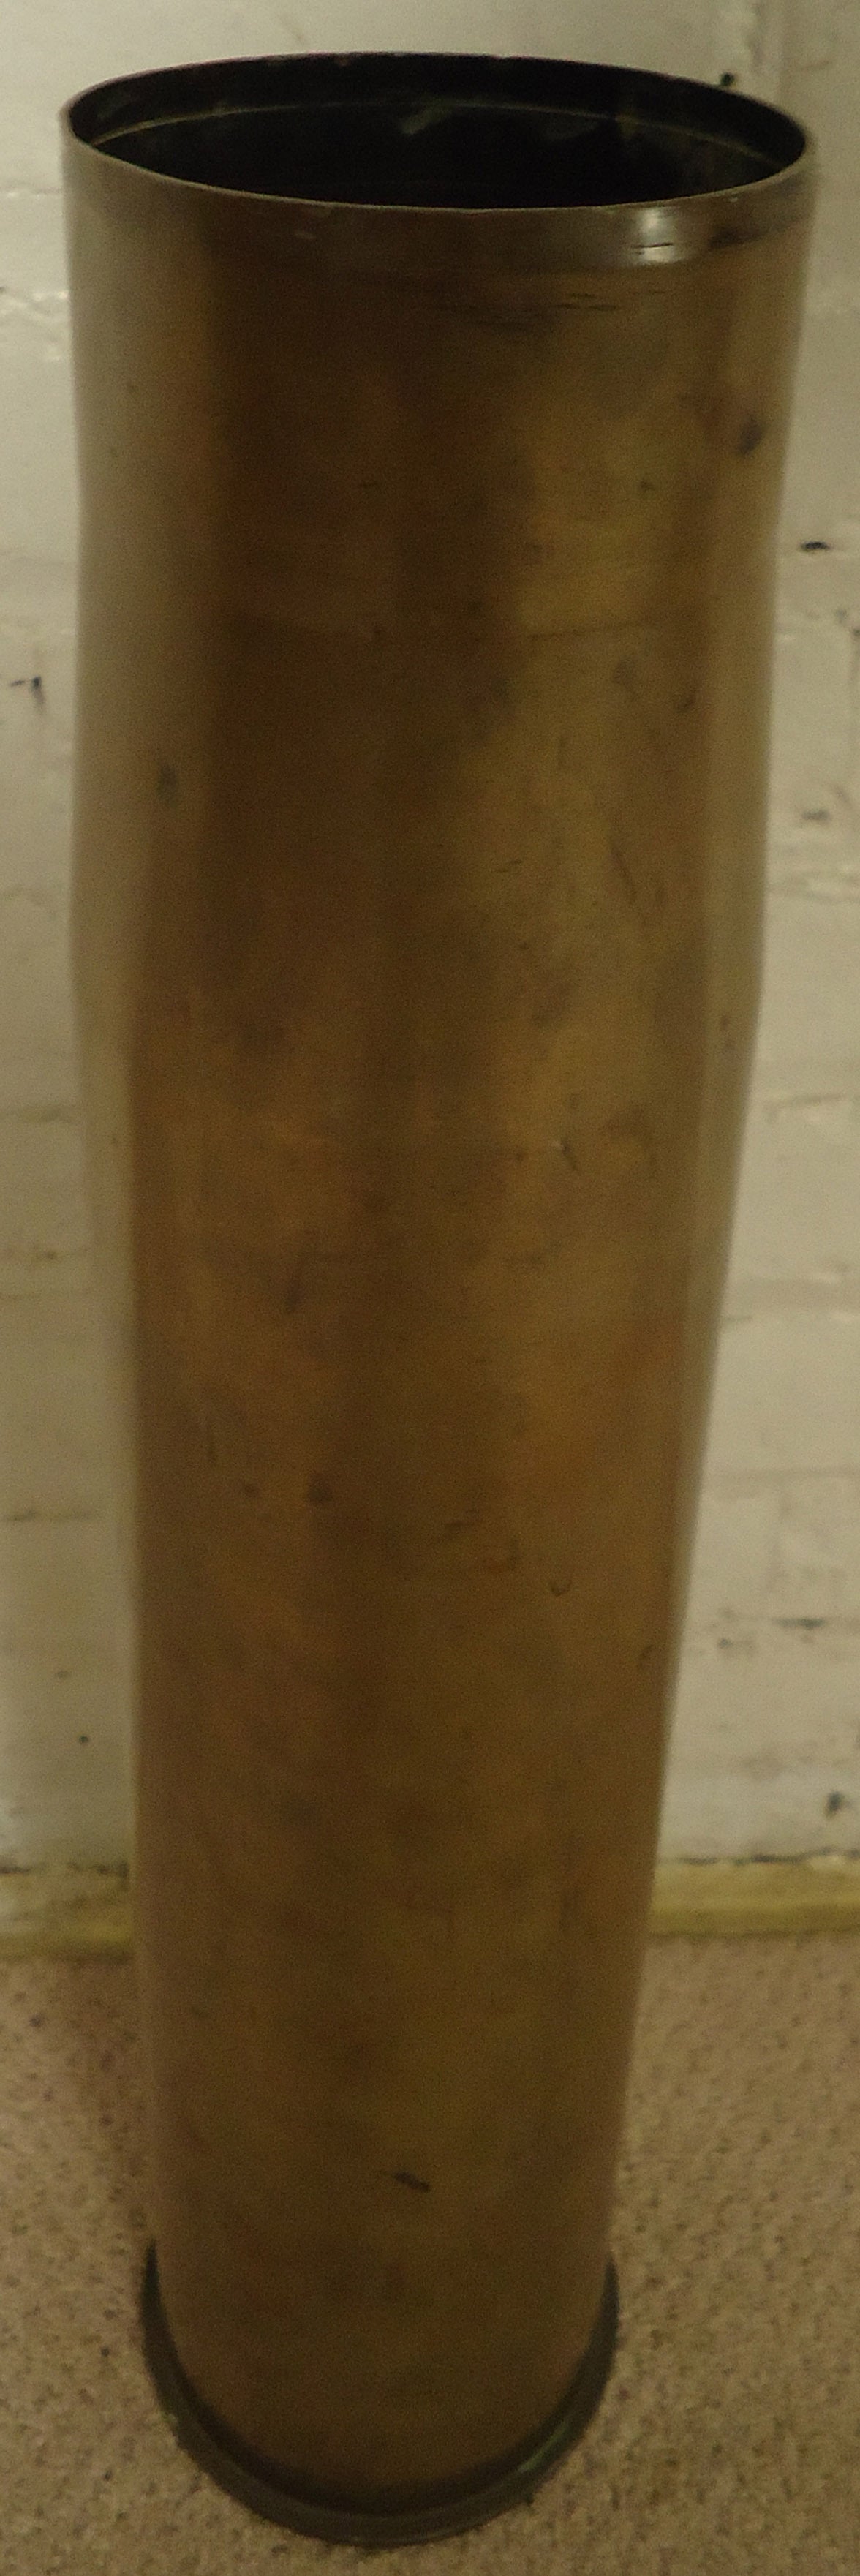 Solid brass bullet casing, perfect as a collectible or for re-purposing as a table lamp.

Please confirm item location NY or NJ with dealer.